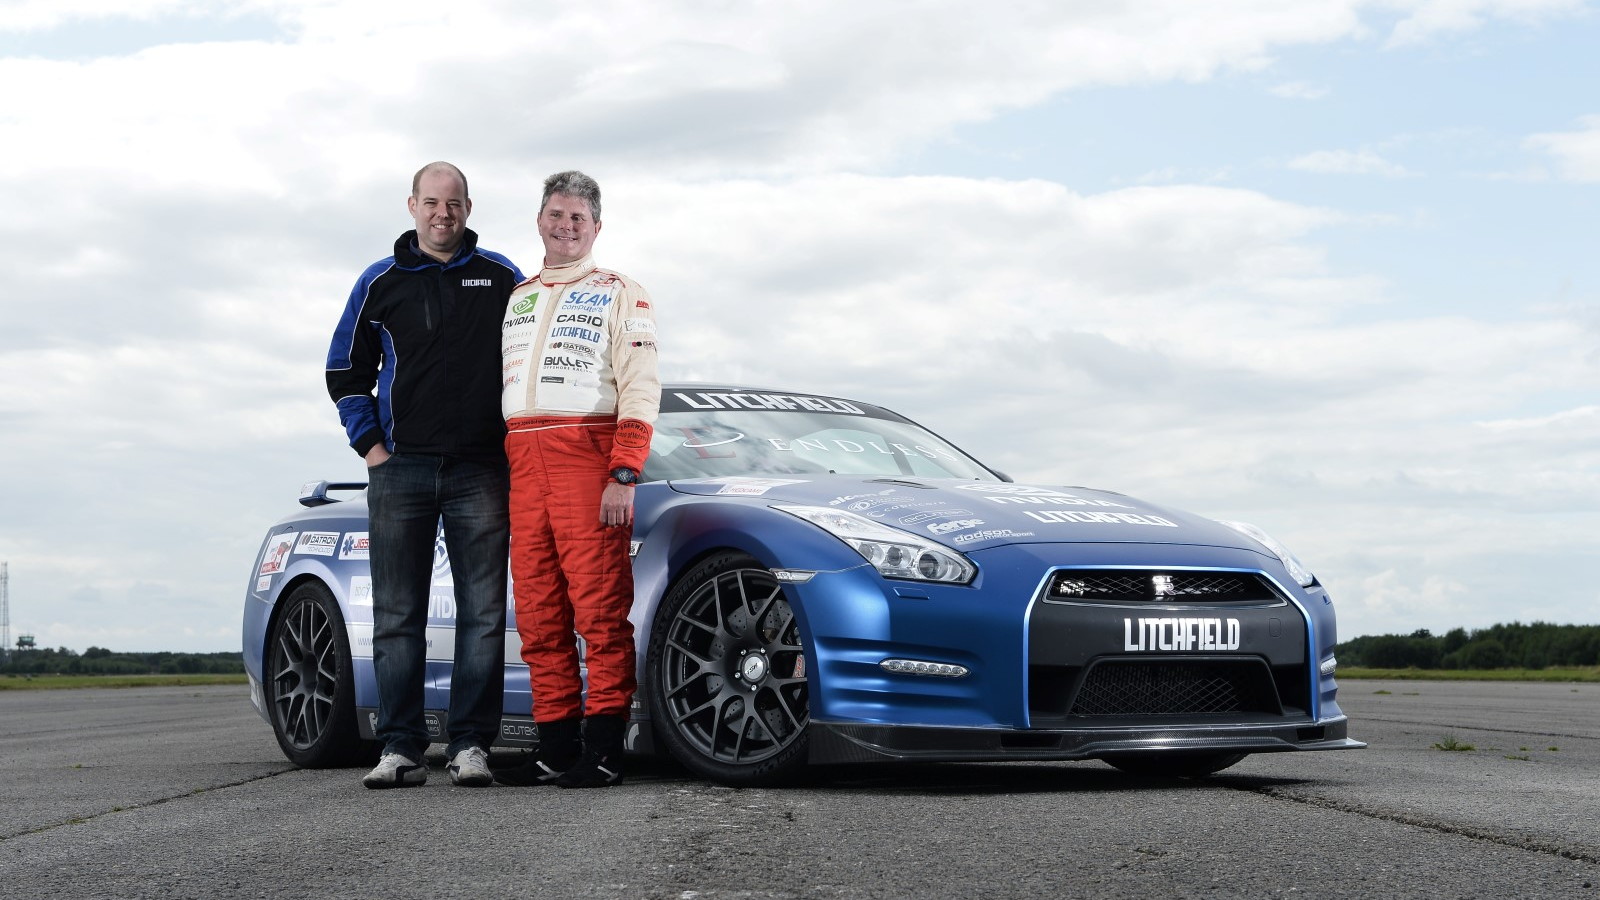 Mike Newman sets new blind land speed record in a Litchfield Nissan GT-R